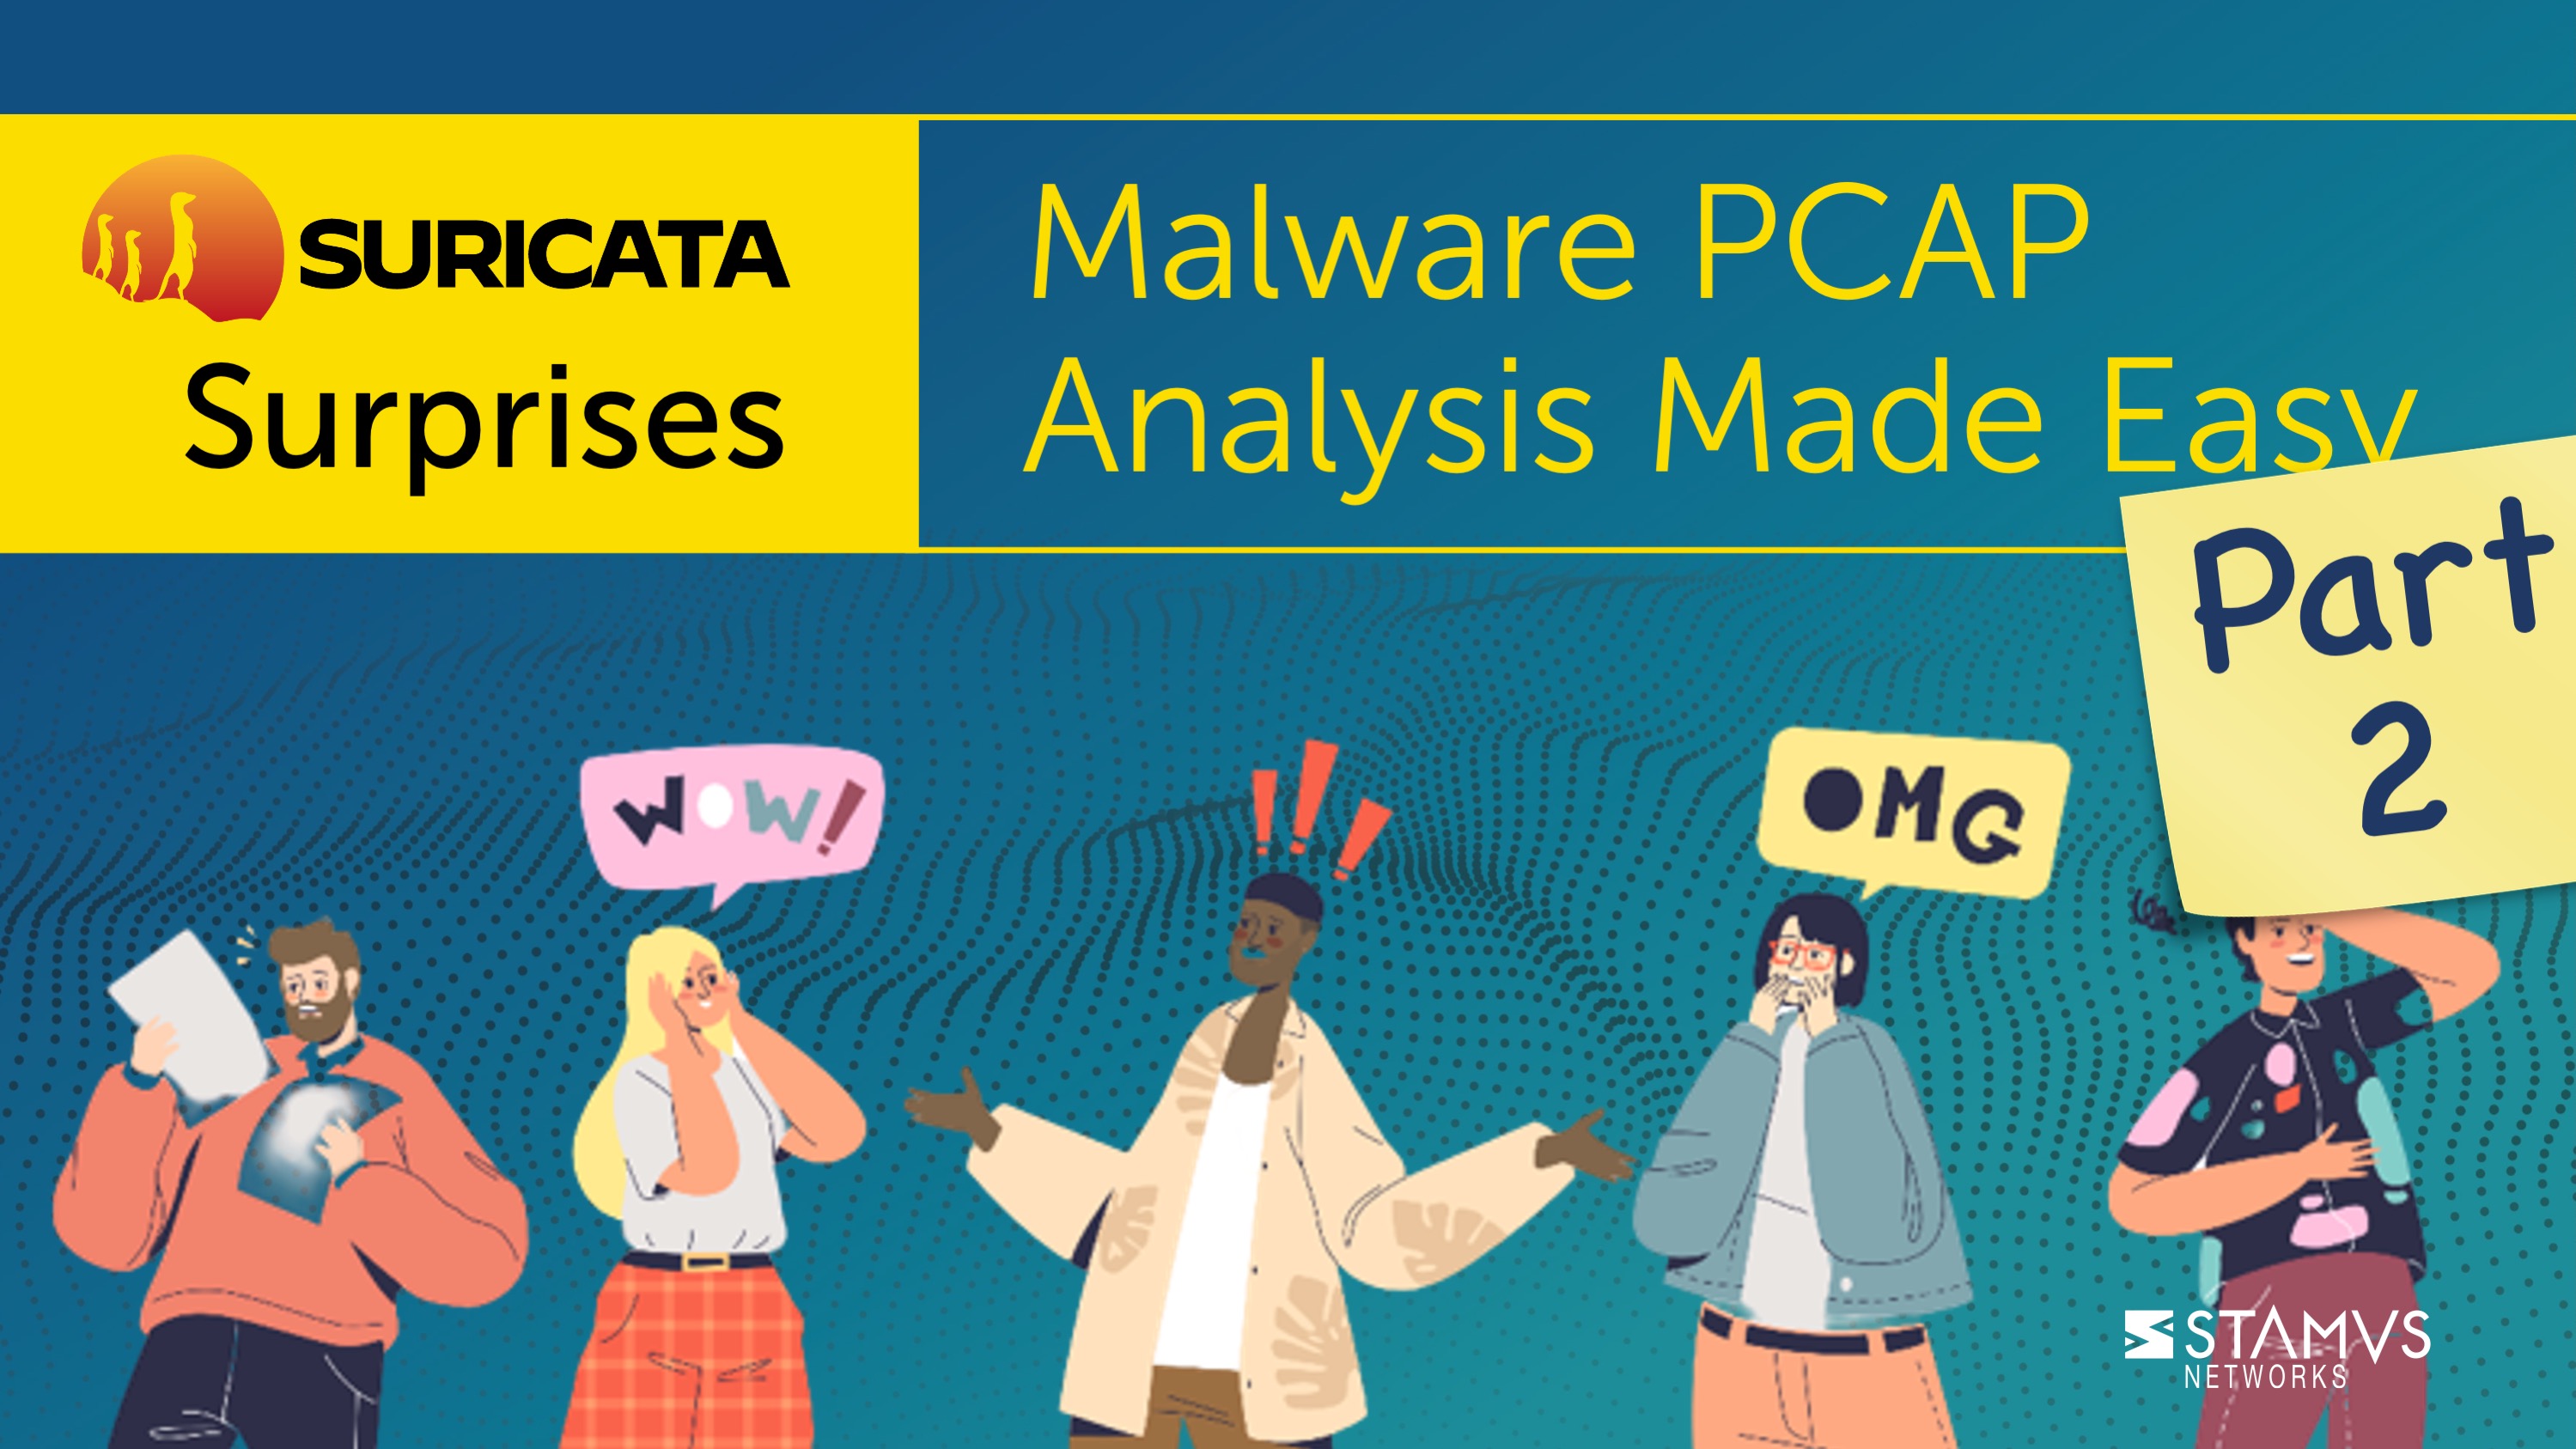 Malware PCAP Analysis Made Easy Part 2 by Peter Manev